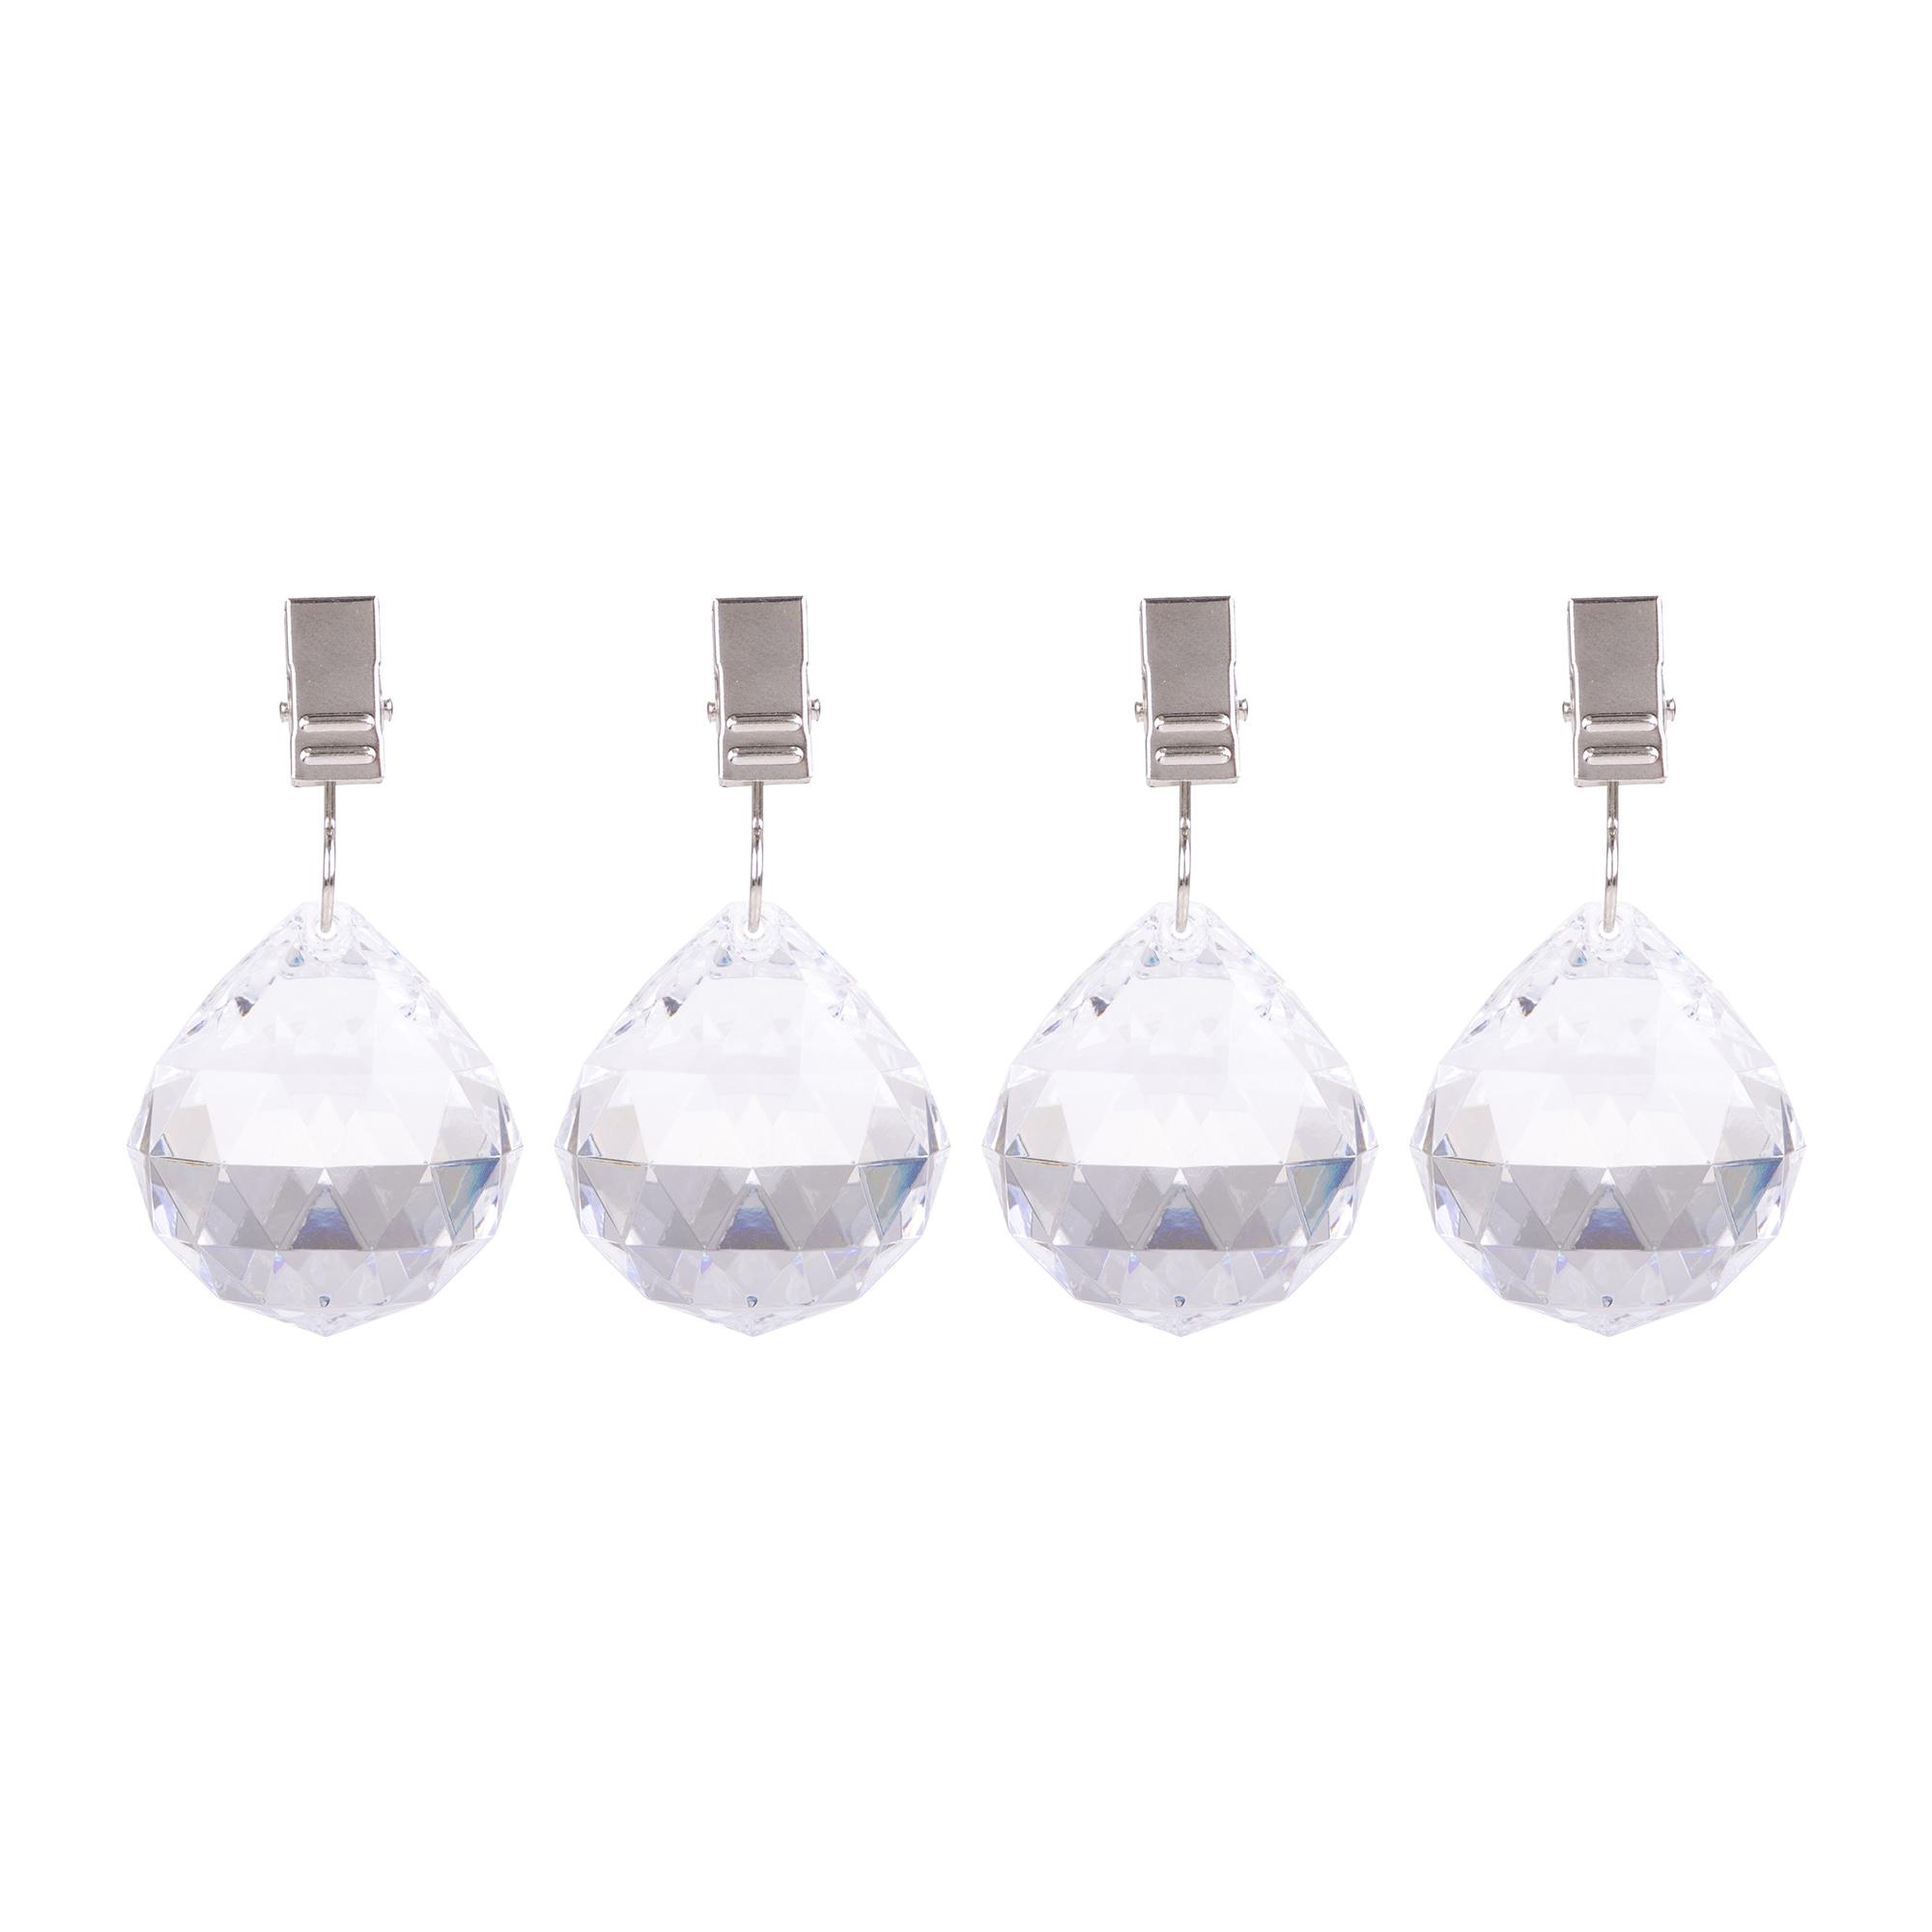 Pizzazz Acrylic Crystal Tablecloth Weights 4pk Image 2